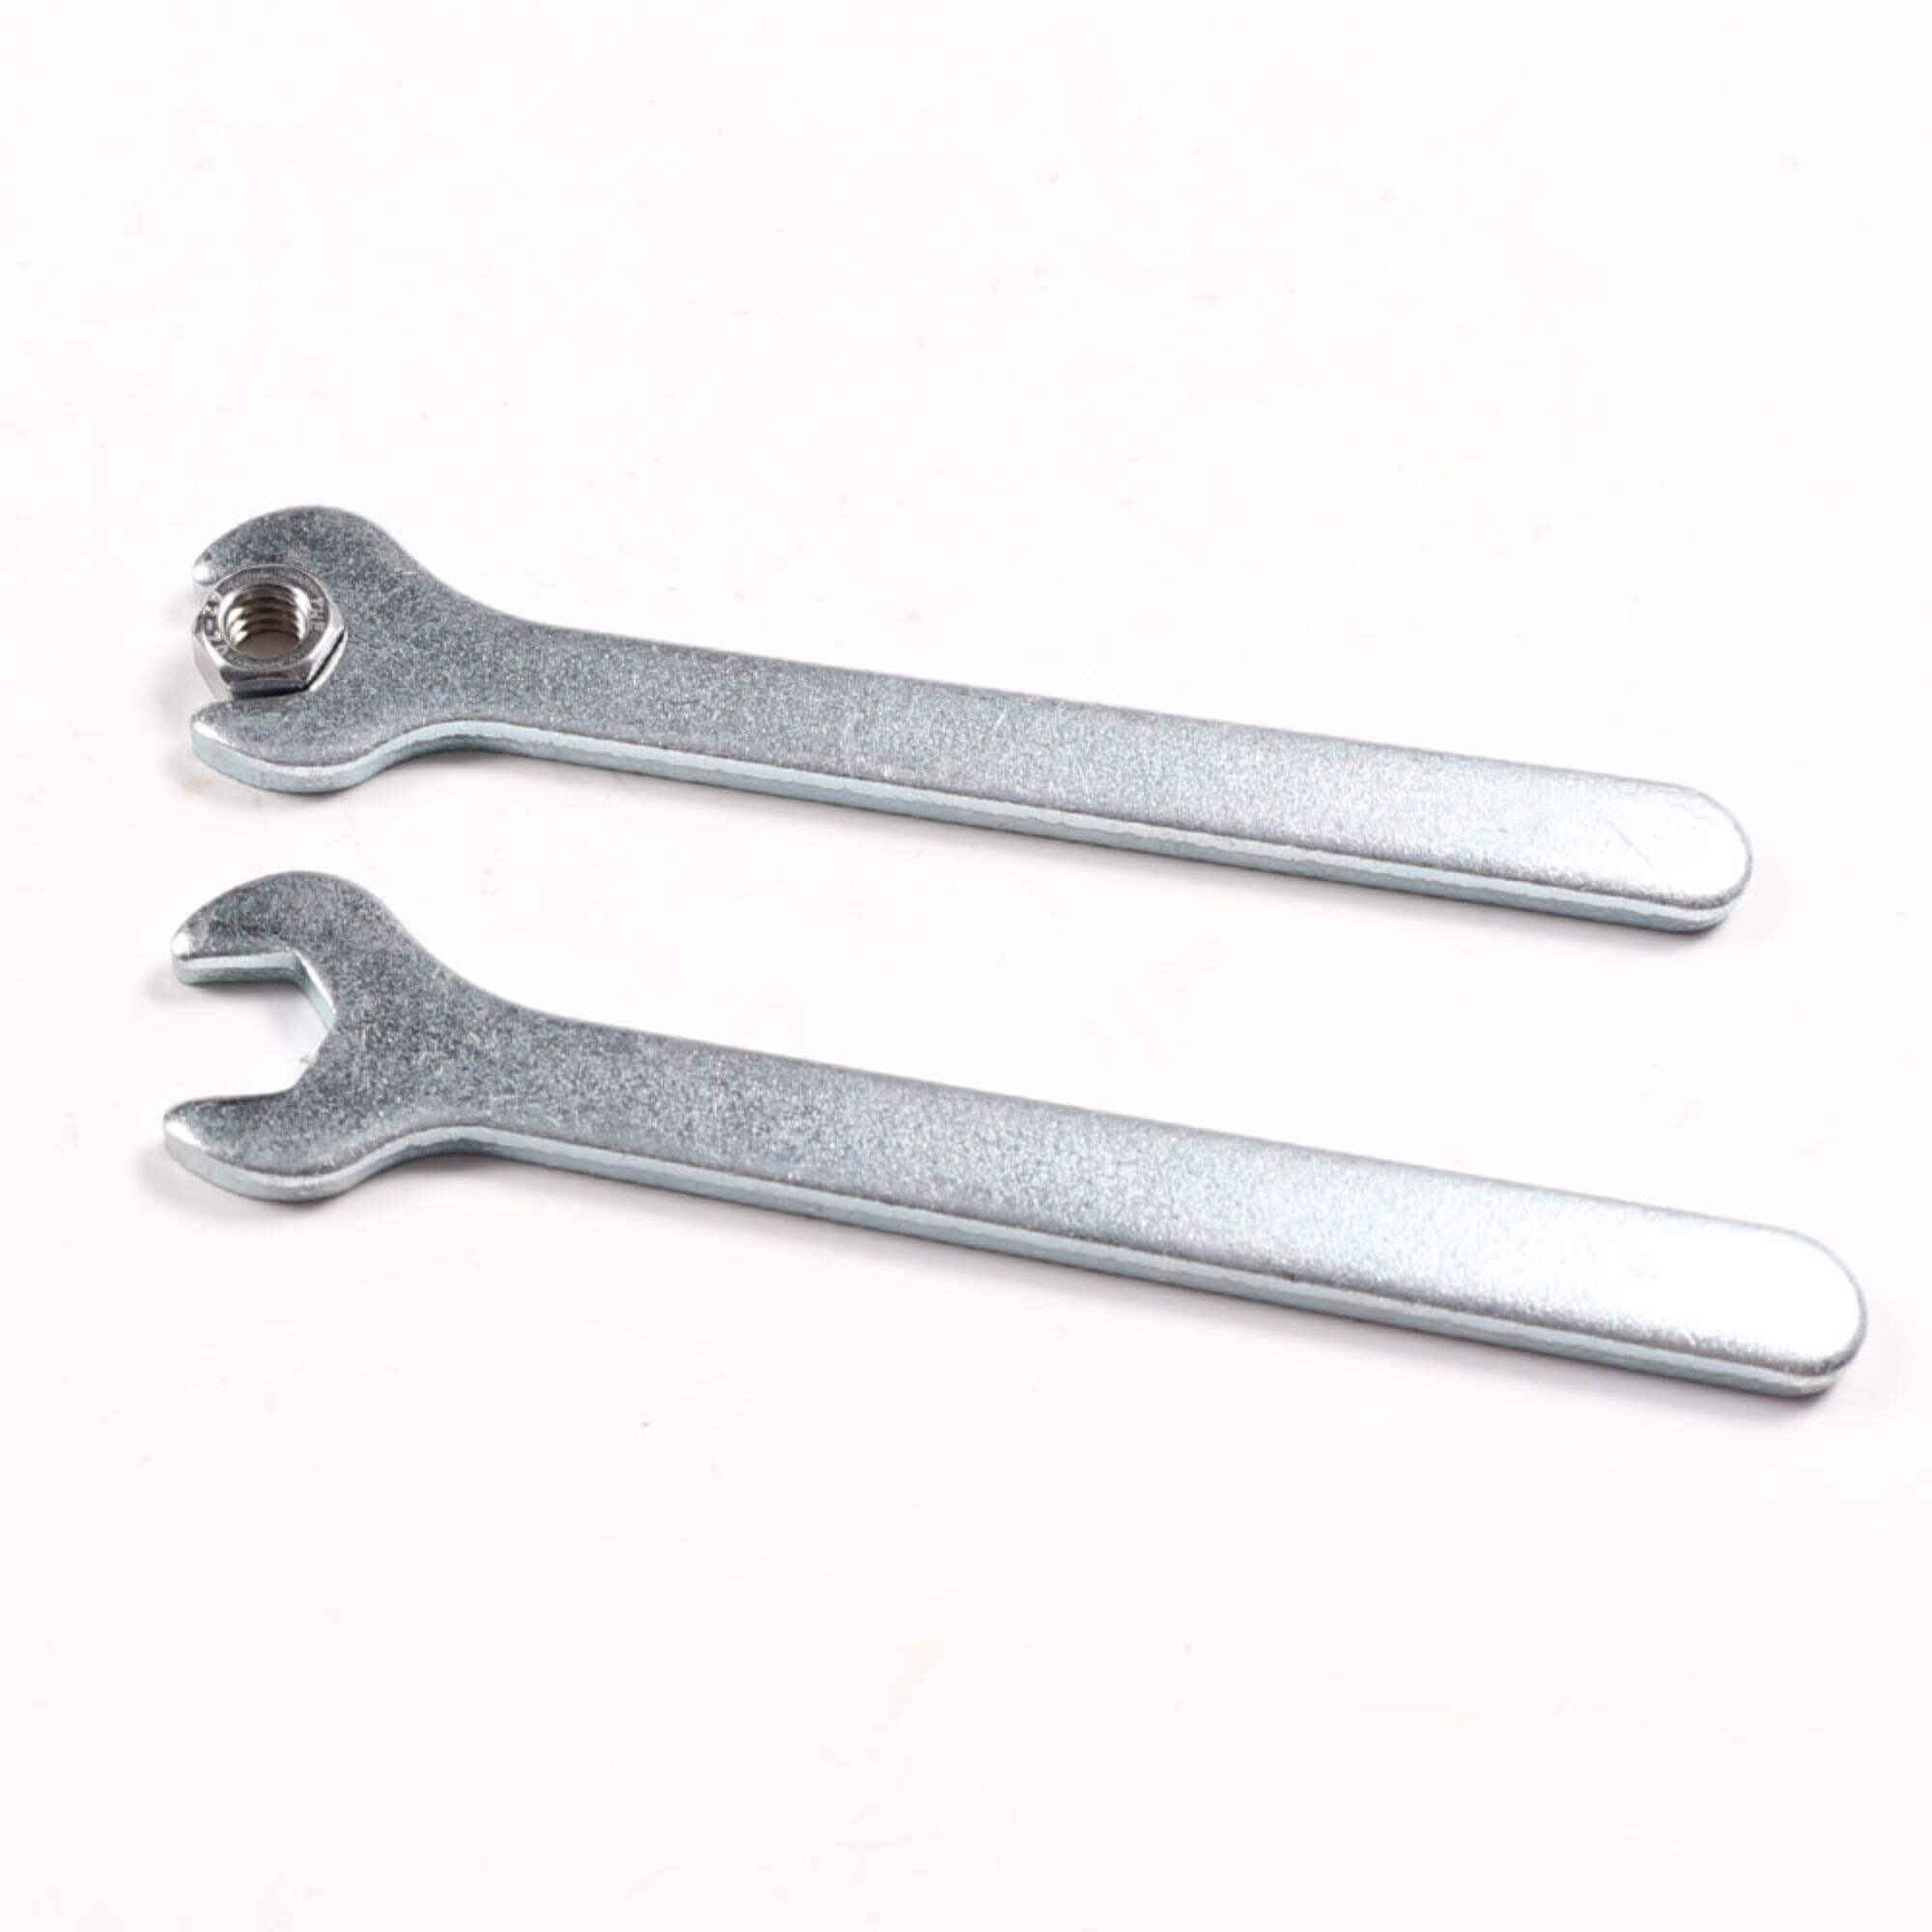 Galvanized Surface Carbon Steel 12mm Long Spanners Allen Hex Key Wrench Set